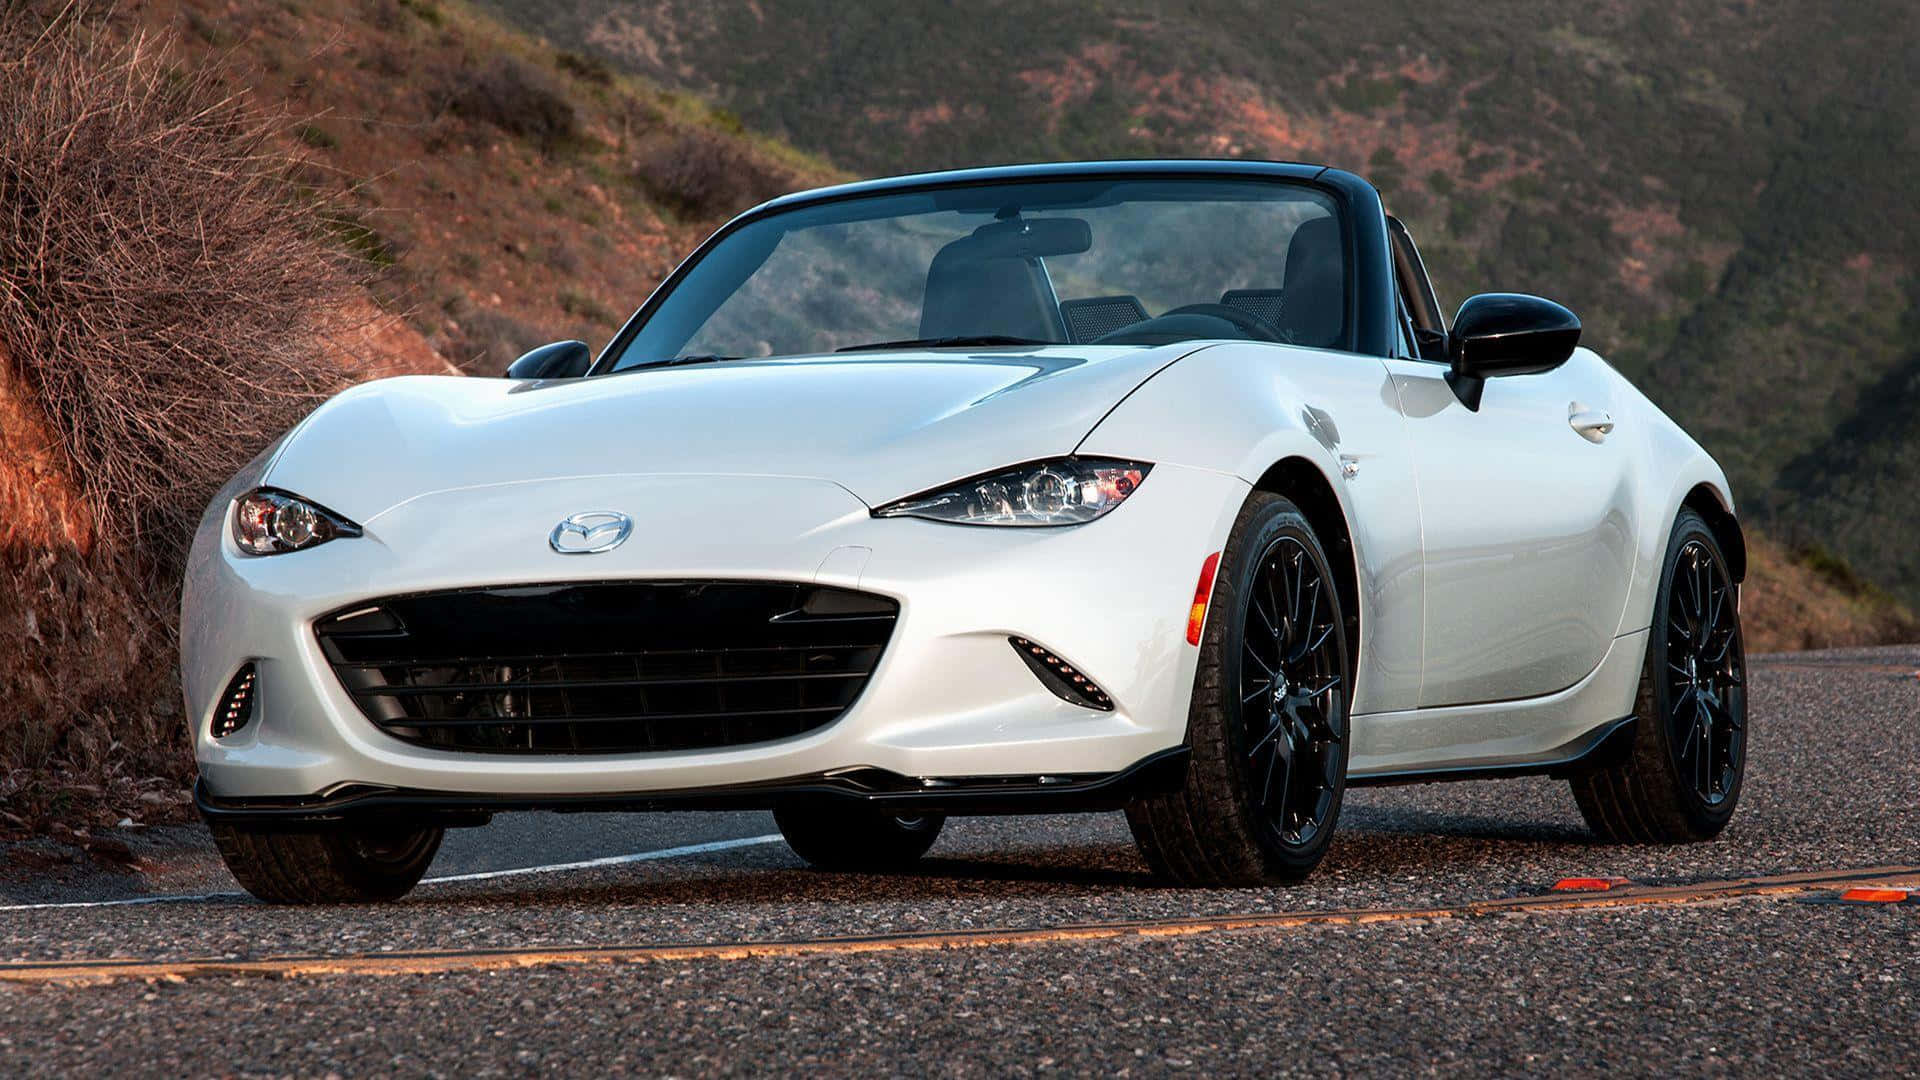 The White Mazda Mx-5 Roadster Is Driving Down A Mountain Road Wallpaper